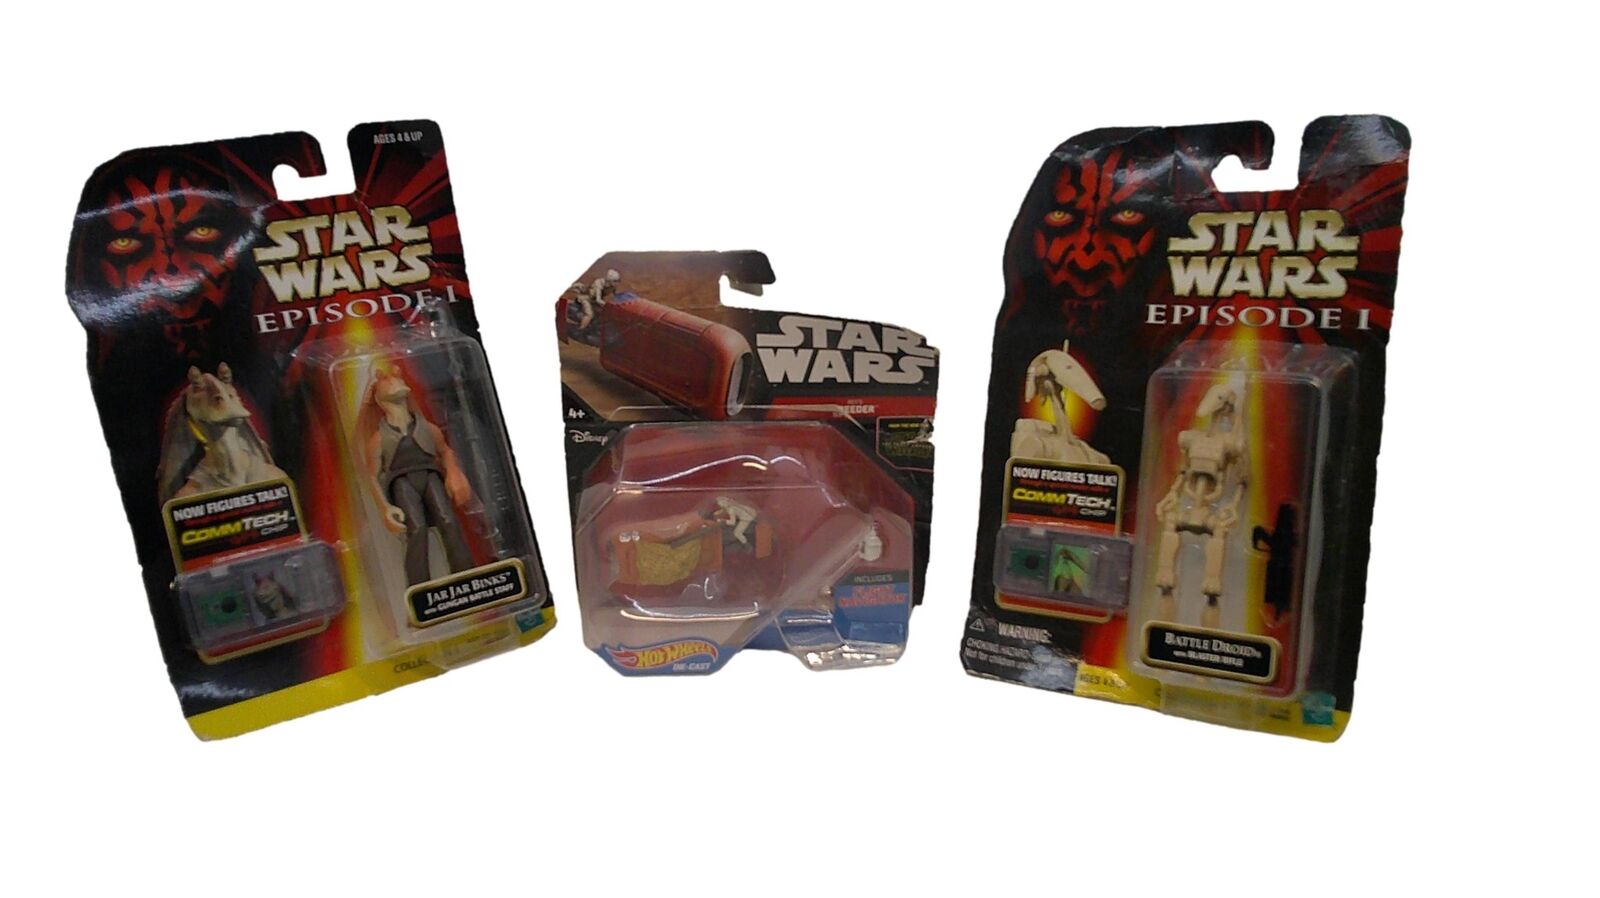 Vintage Star Wars Episode 1 Action Figures and Hot Wheels 3 Pack New In Box